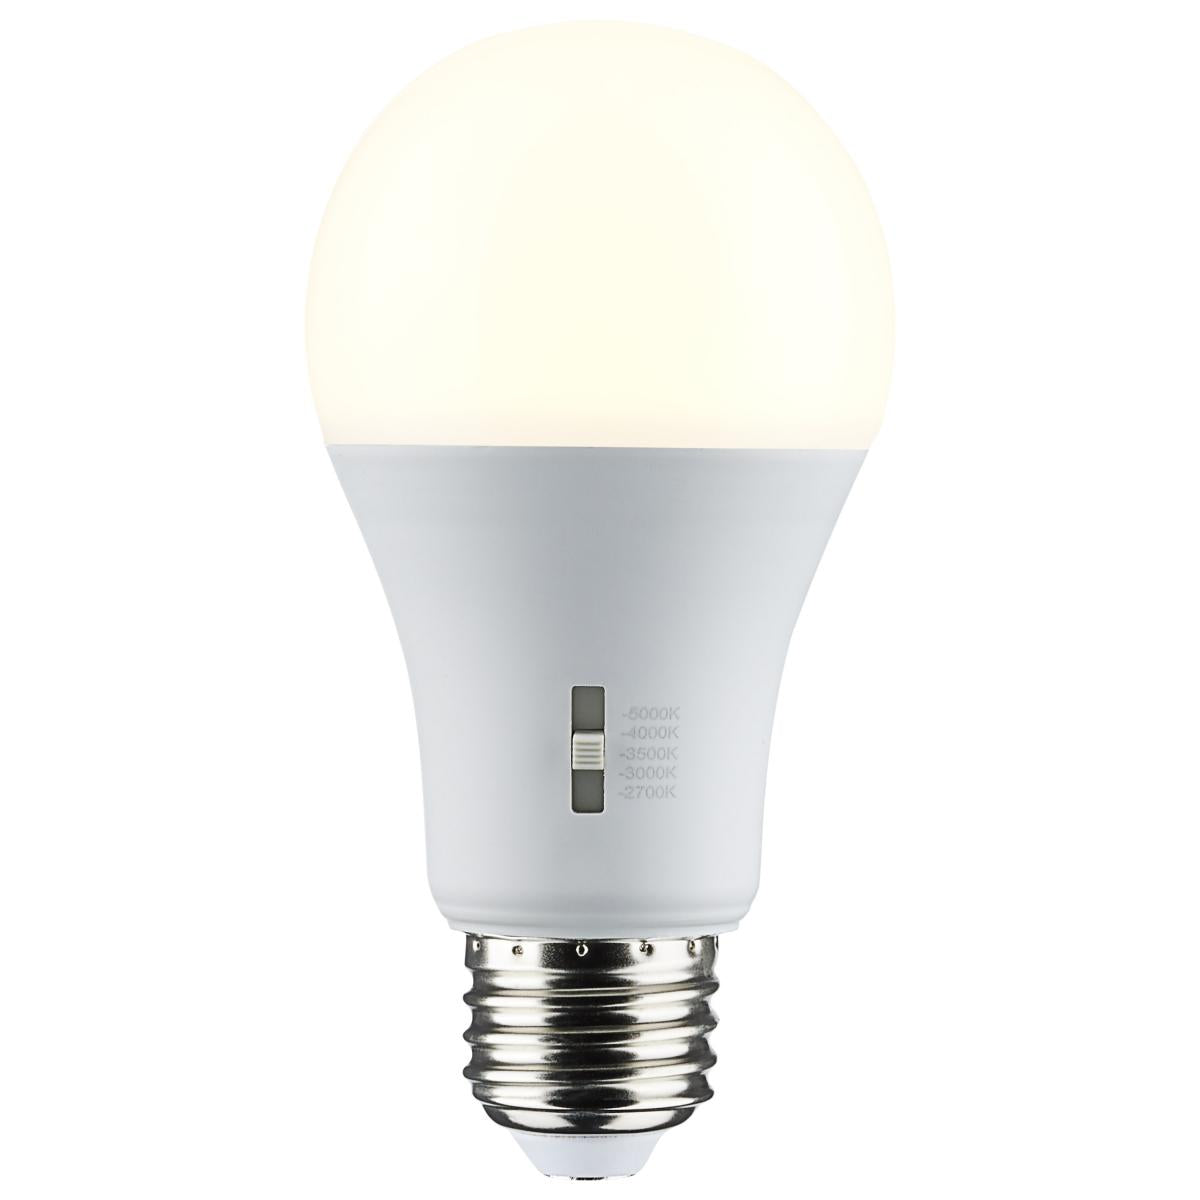 A19 LED Bulb, 75W Equivalent, 12 Watt, 1100 Lumens, Selectable CCT 2700K to 5000K, E26 Medium Base, Frosted Finish - Bees Lighting